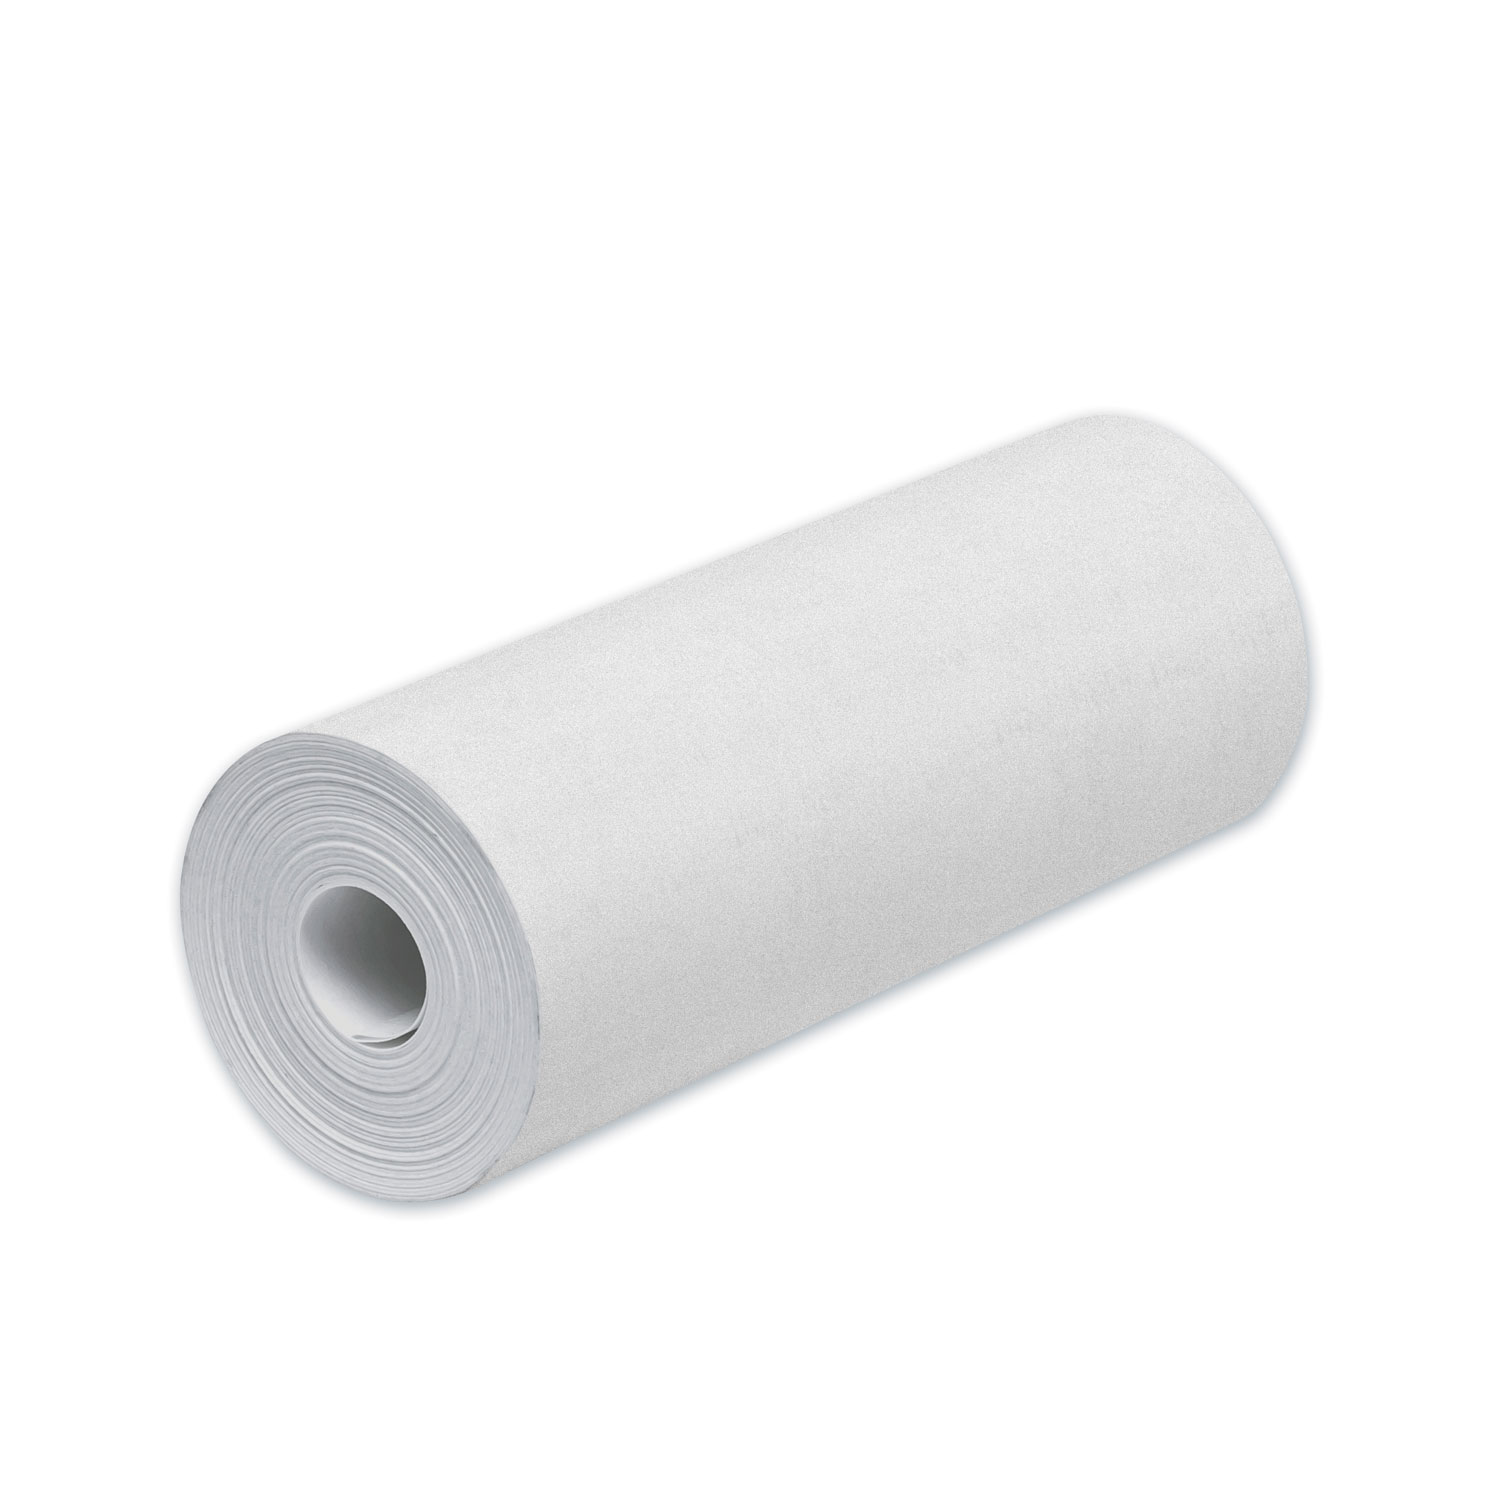  Iconex 90720008 Direct Thermal Printing Thermal Paper Rolls, 2.25 x 24 ft, White, 100/Carton (ICX90720008) 